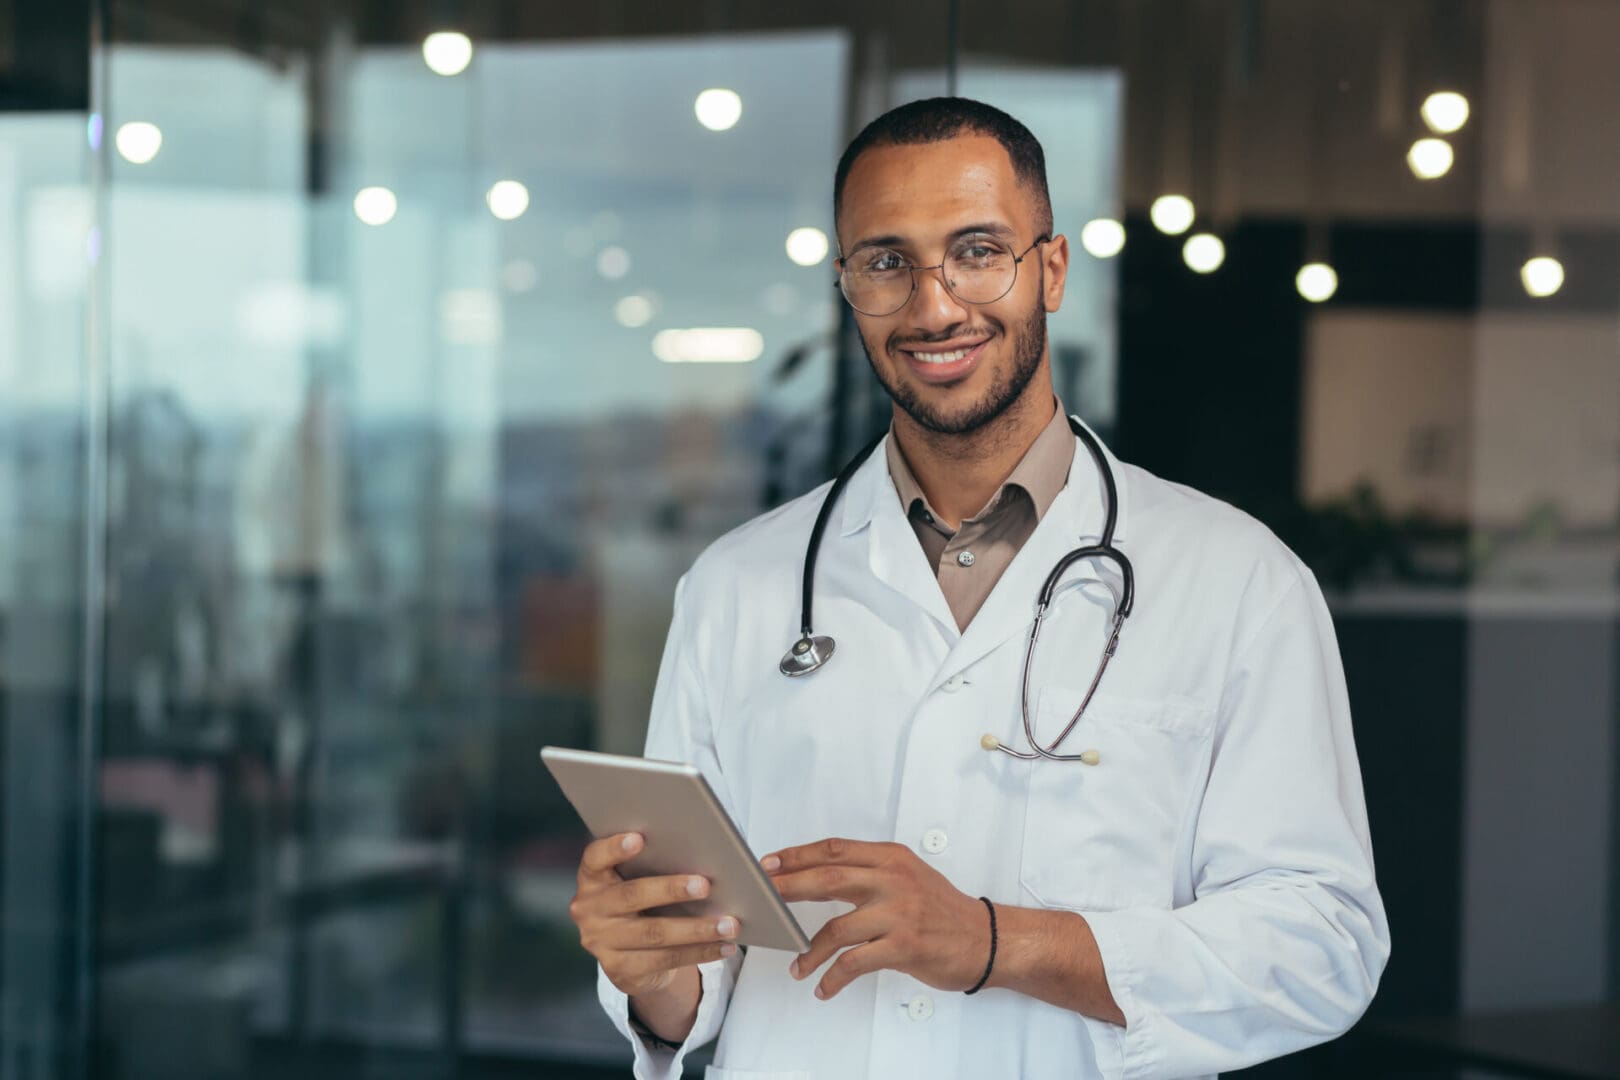 Portrait of happy and successful african american doctor man working inside office clinic holding tablet computer looking at camera and smiling wearing white coat with stethoscope.